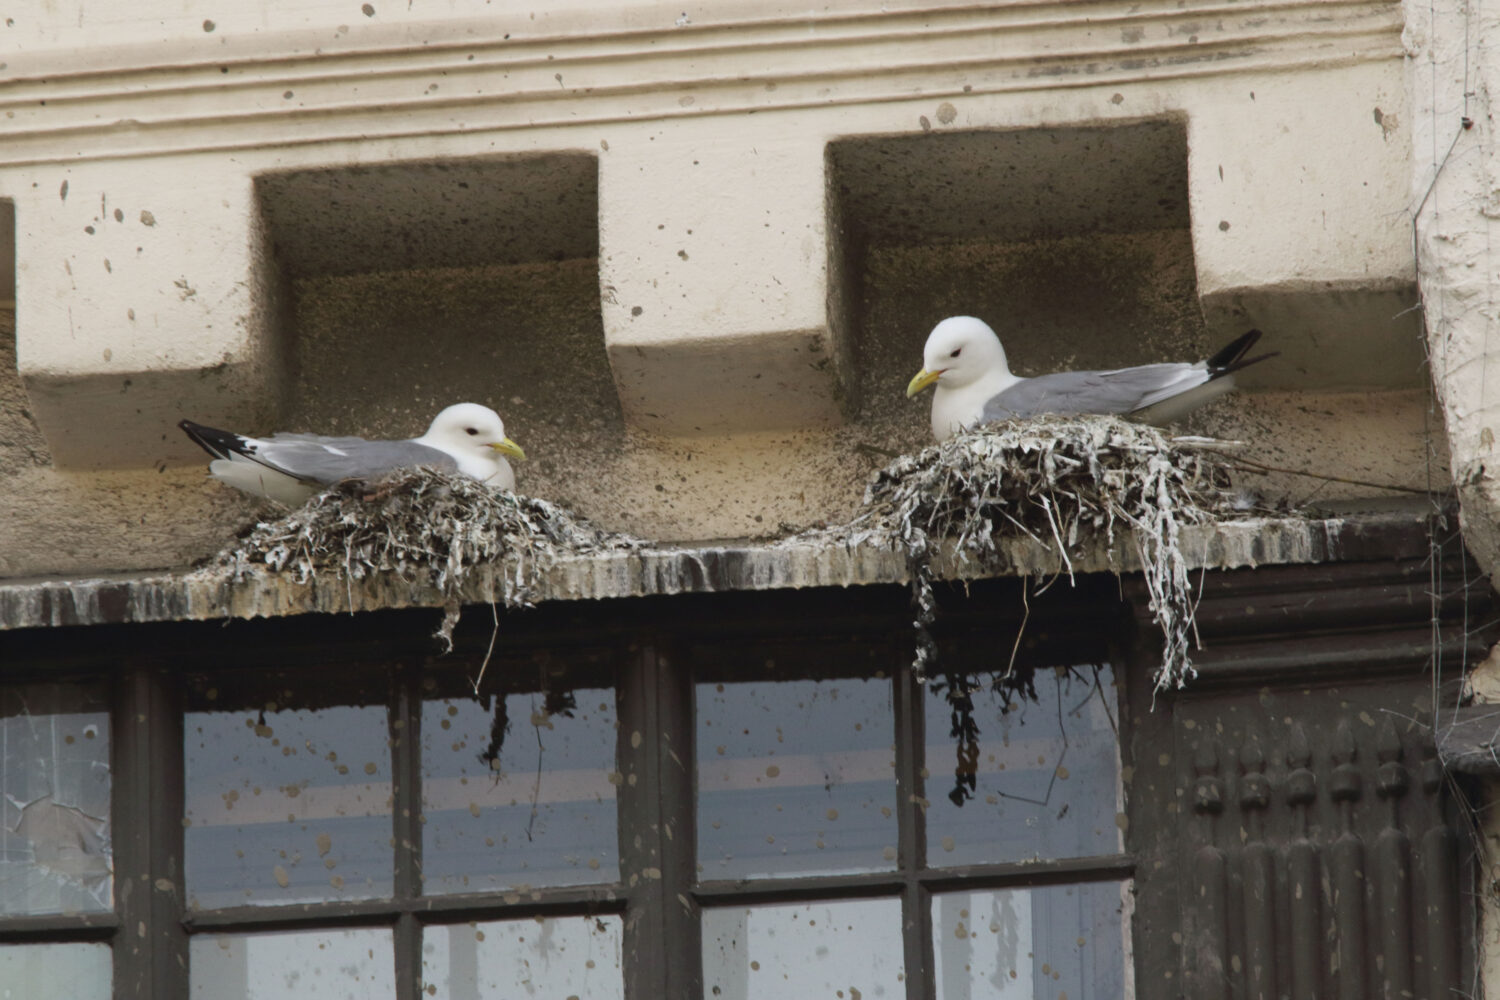 A pair of Kittiwakes sitting on their nest on the ledge of a building